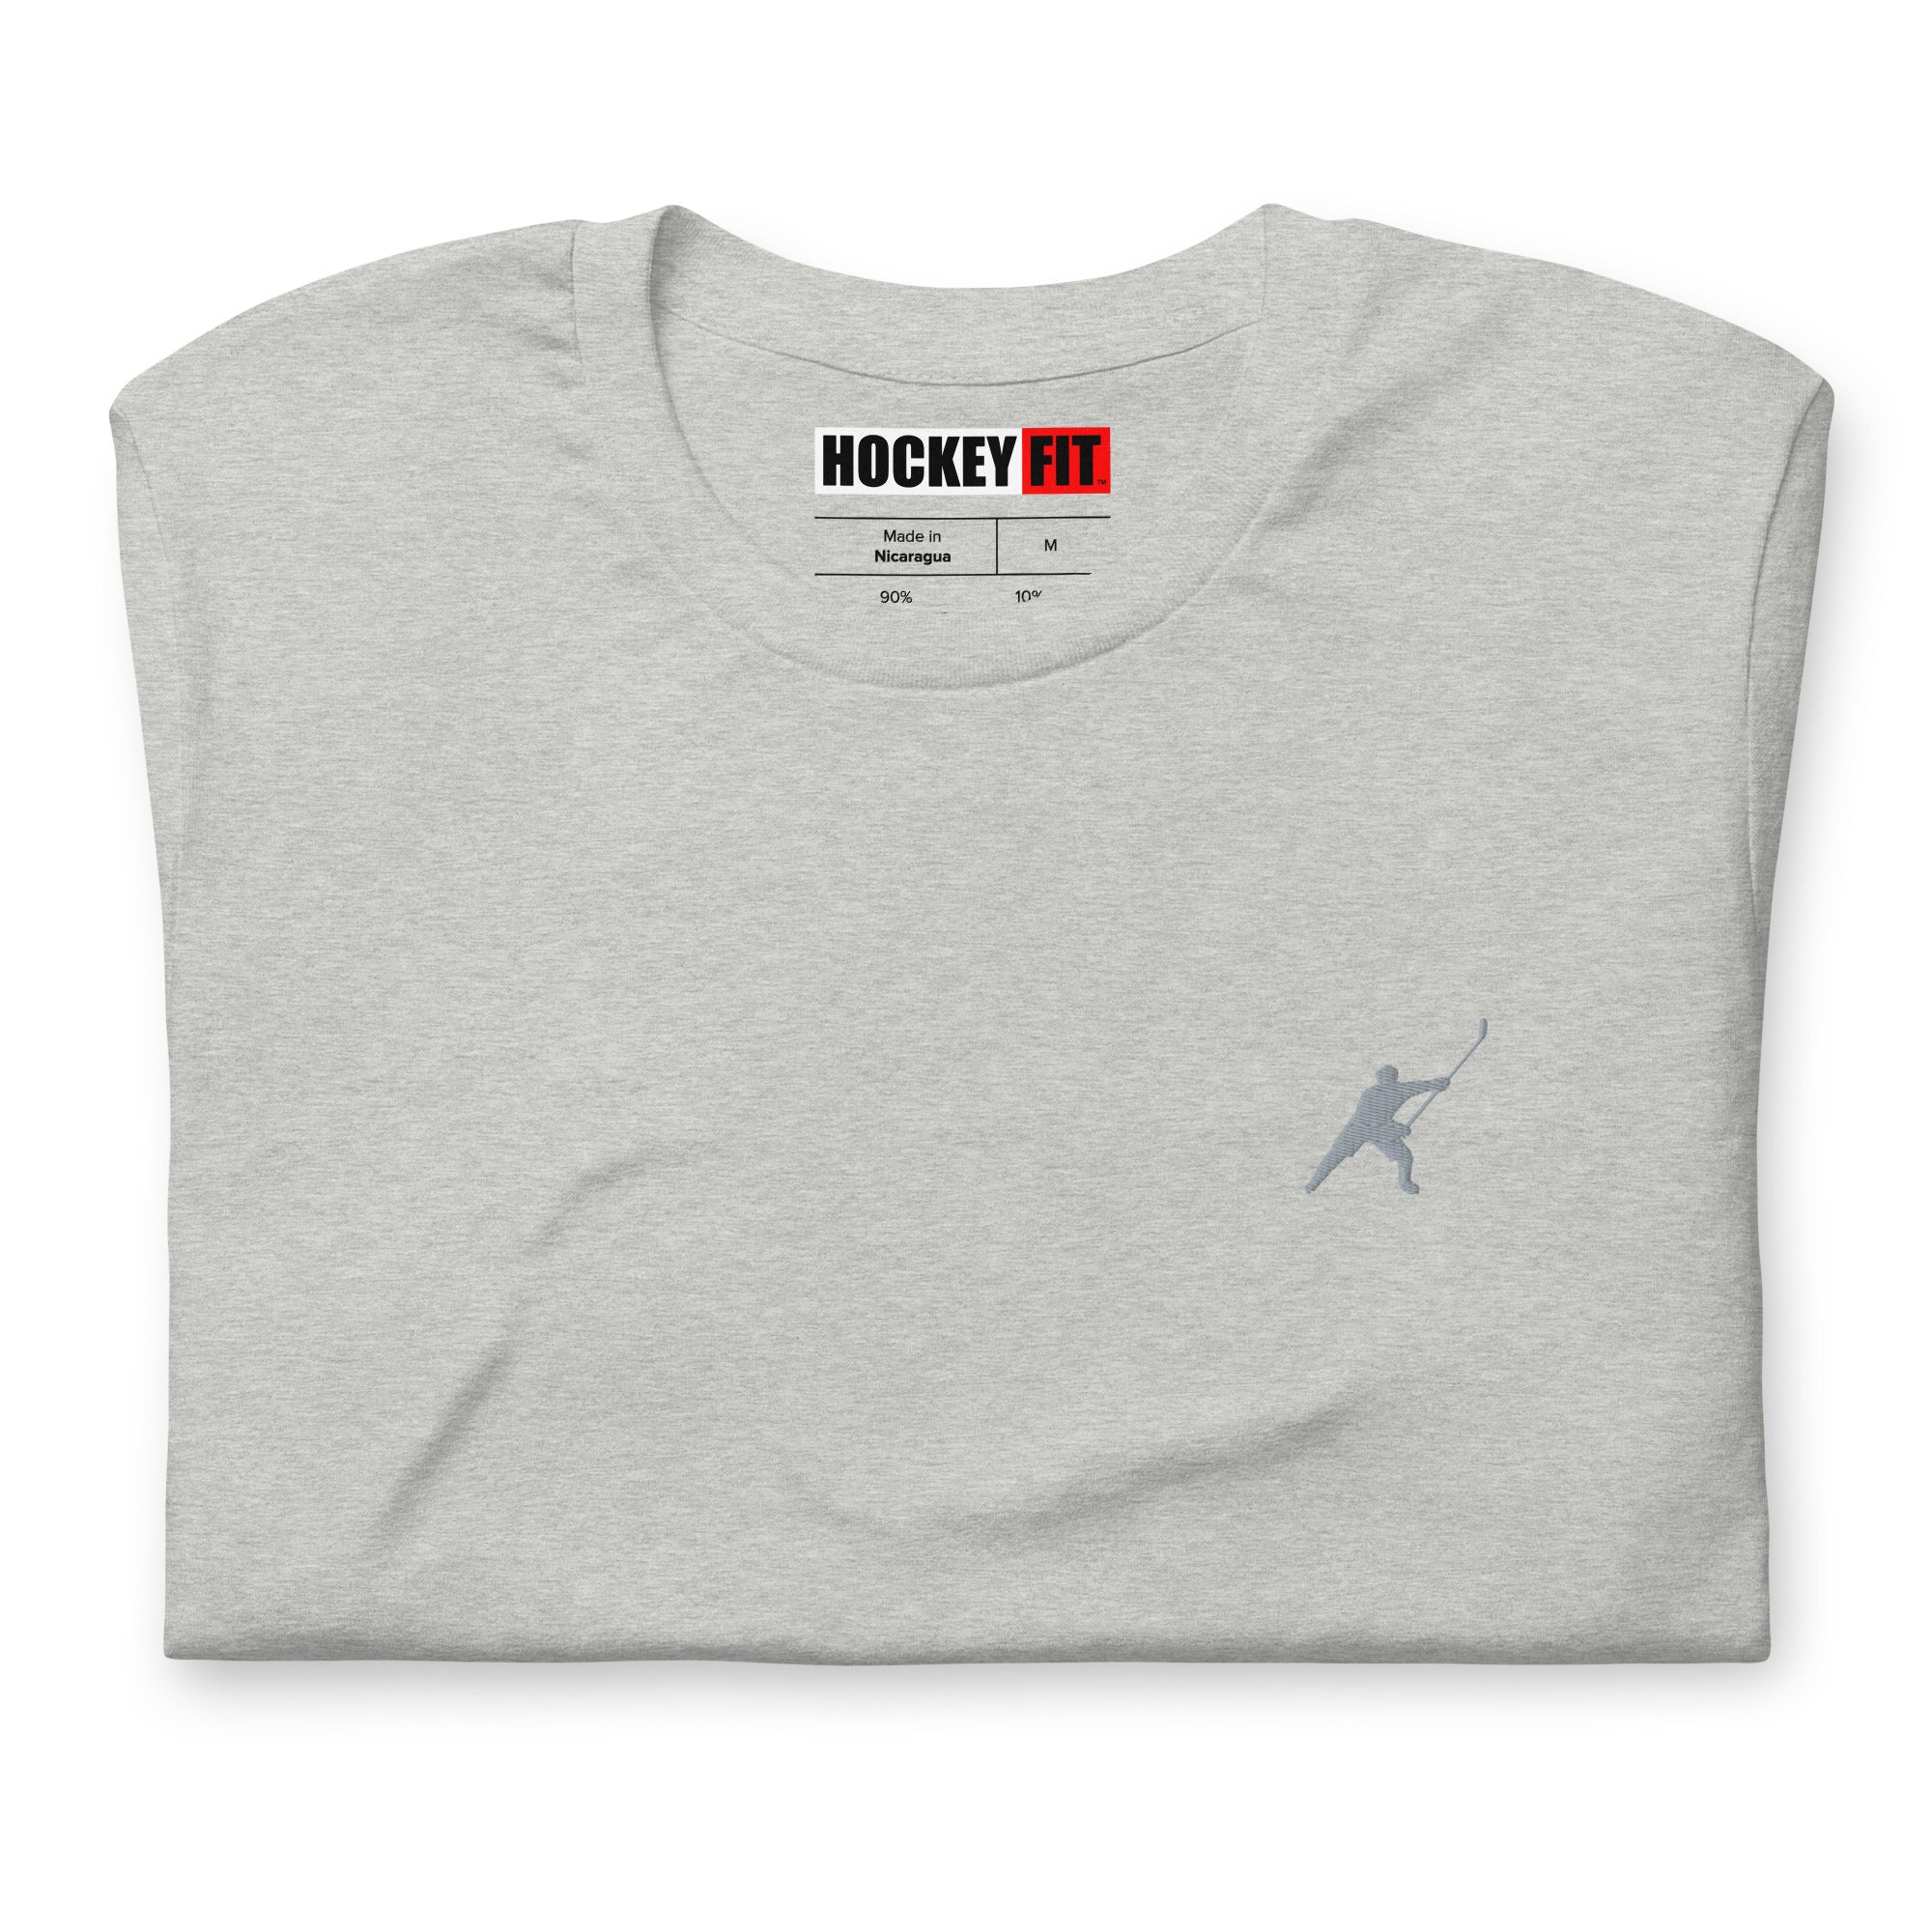 HOCKEYFIT™ EMBROIDERED GREY T-SHIRT